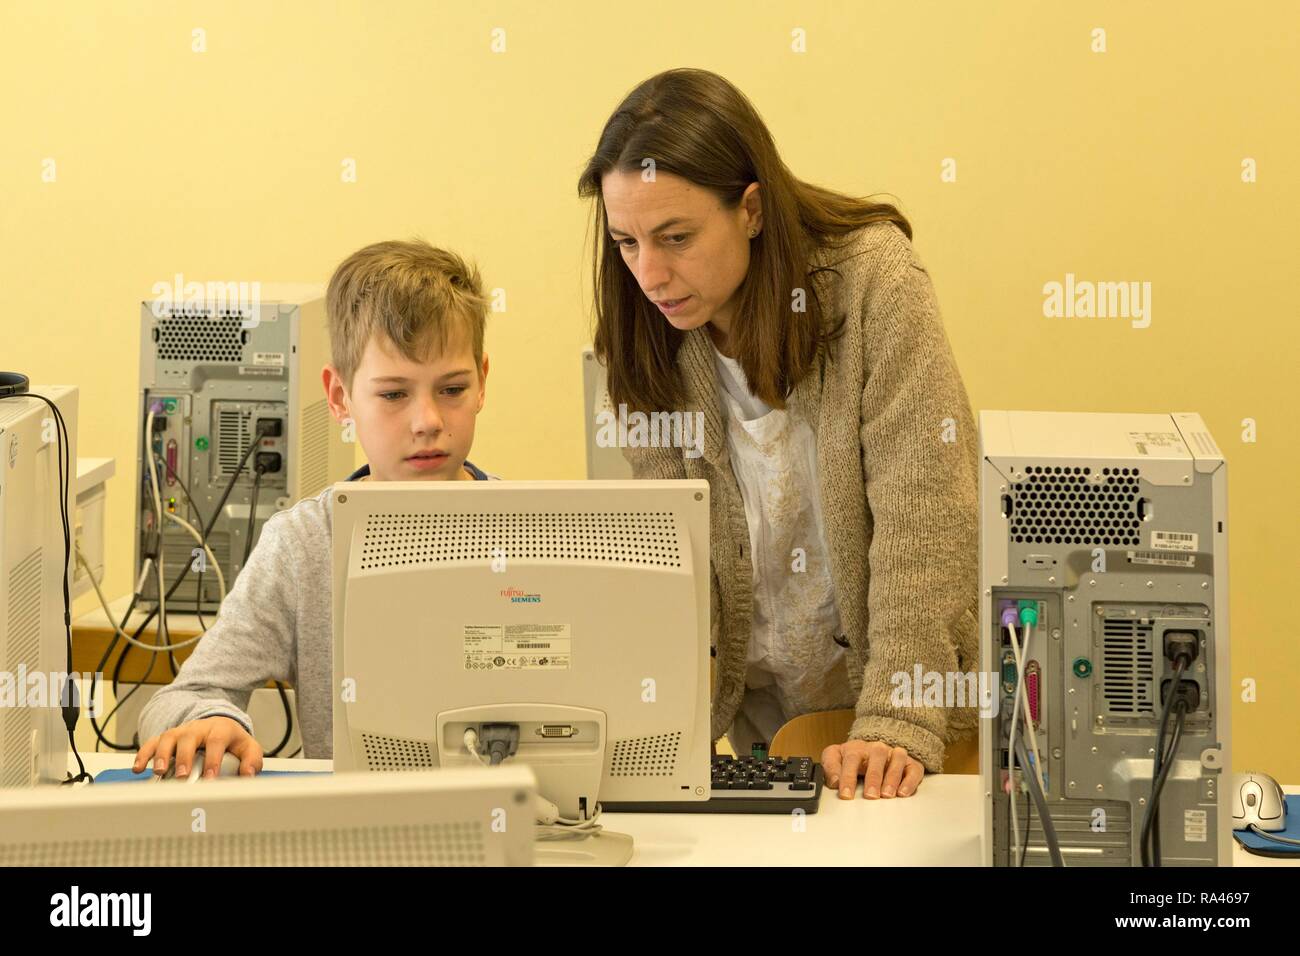 Elementary school student working in computer room, Lower Saxony, Germany Stock Photo